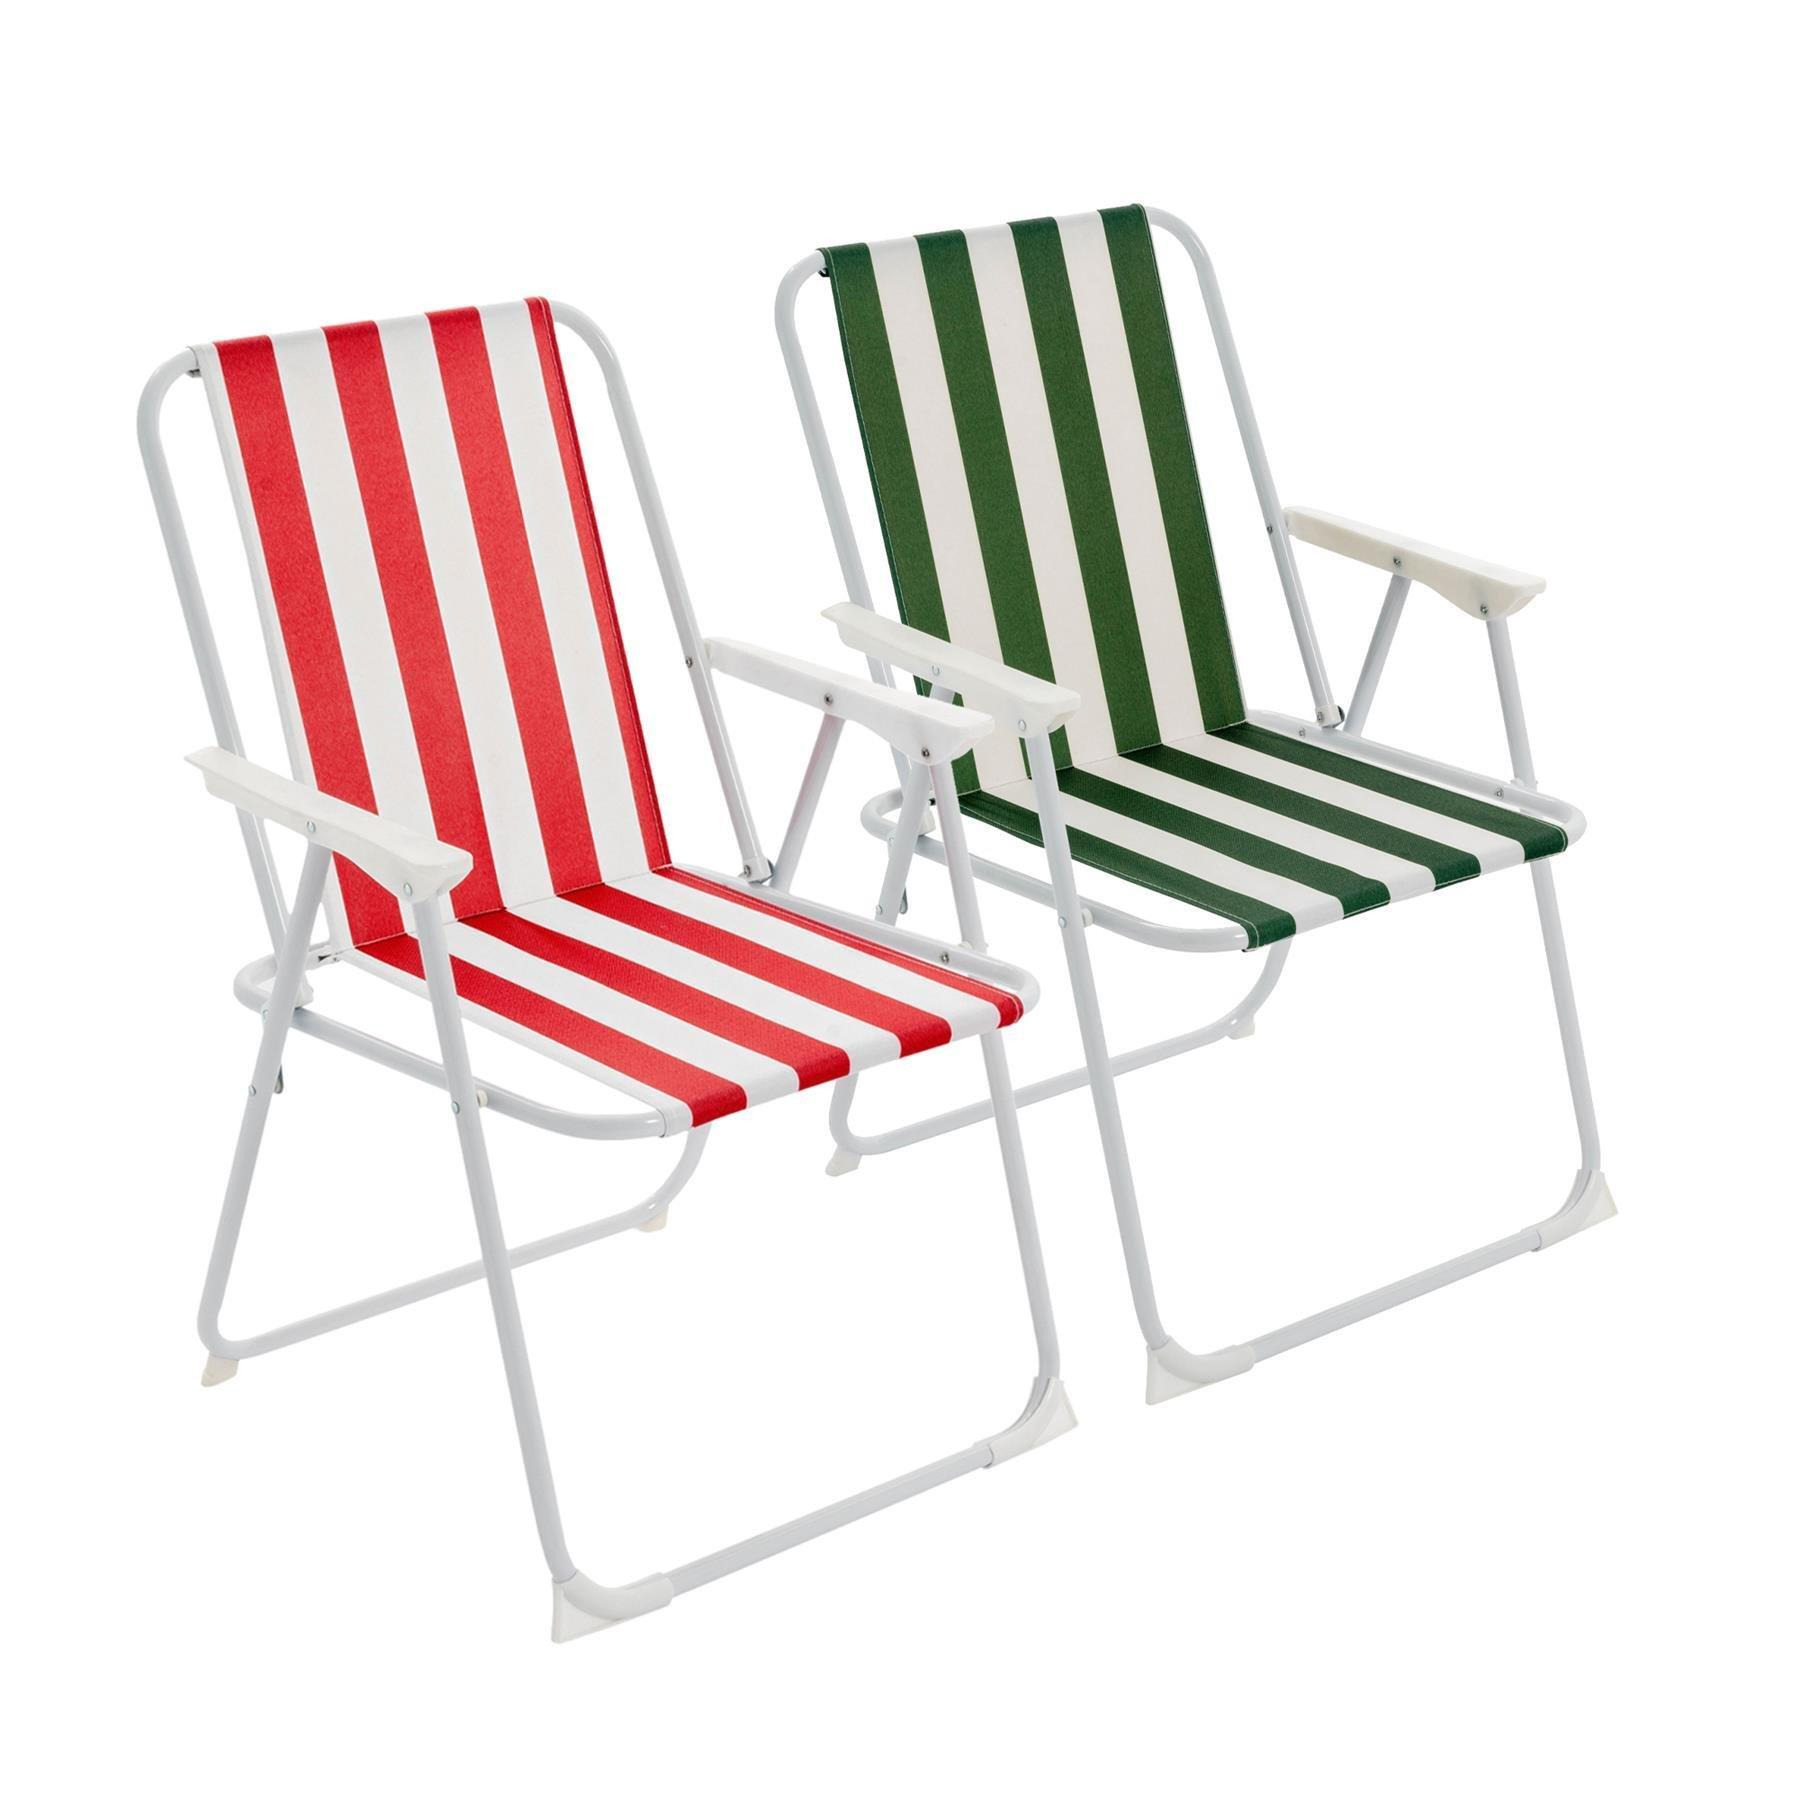 Folding Metal Beach Chairs Red/Green Stripe Pack of 2 - image 1